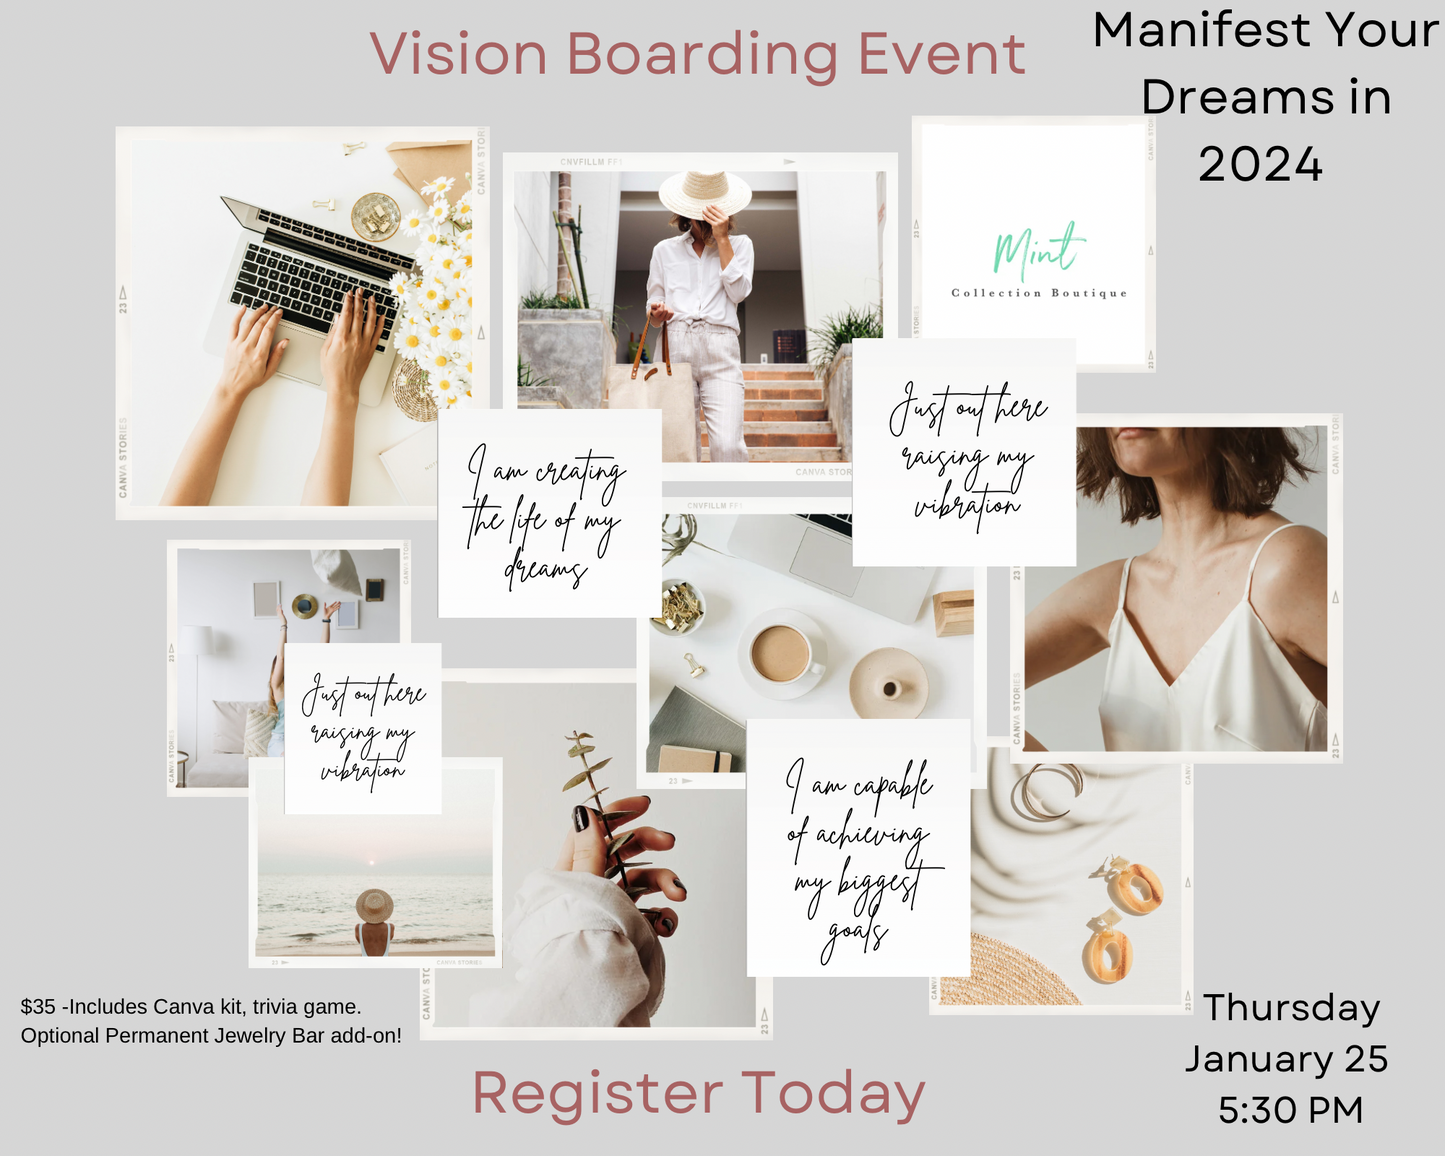 2024 Vision Boarding Party &
Goal Setting at THE ASBURY HOTEL